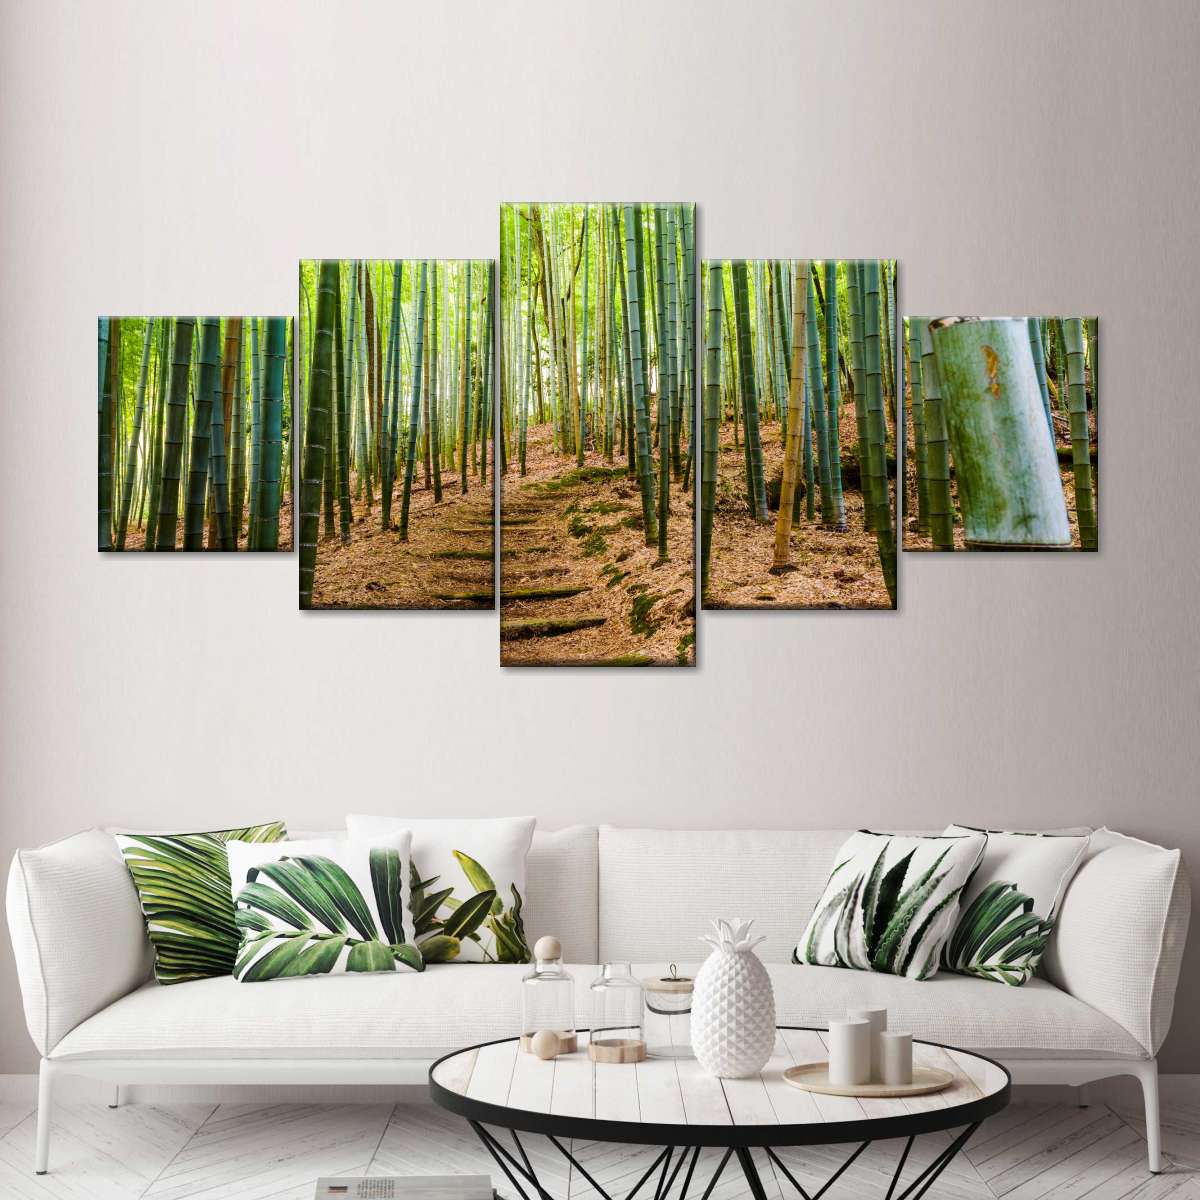 Iconic Kyoto Bamboo Forest Wall Art